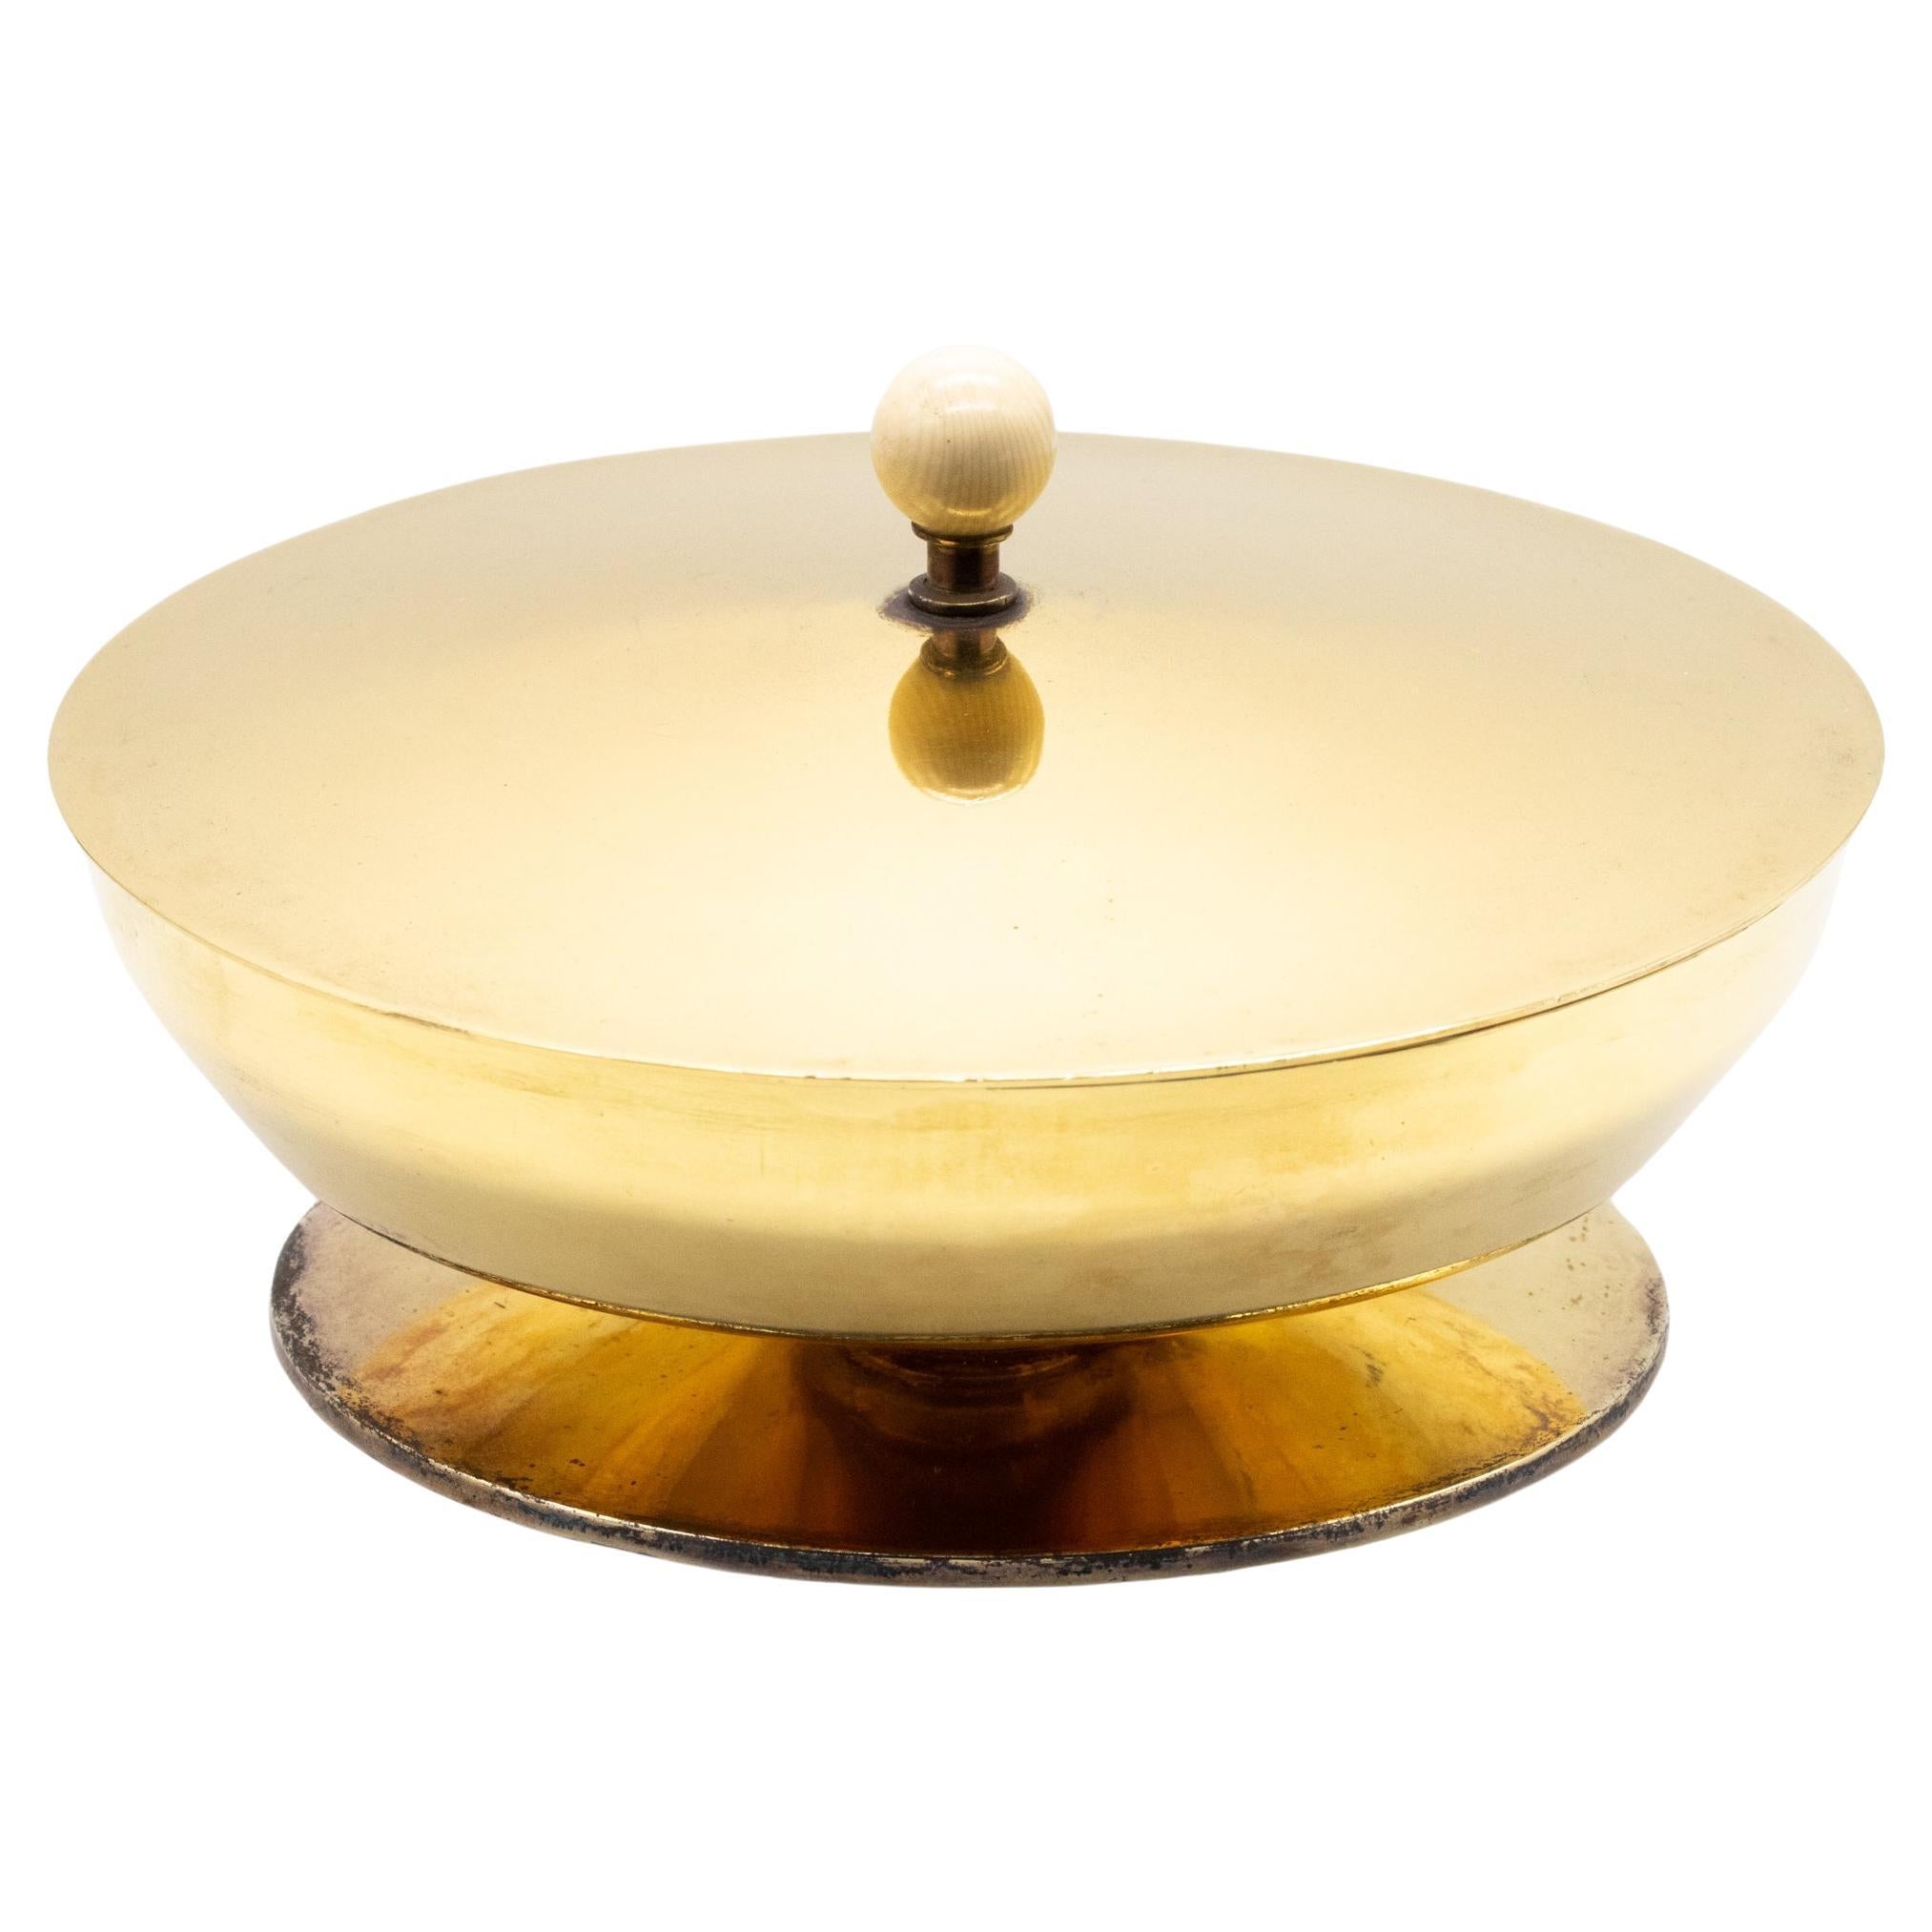 Art Deco 1930 Swiss Centerpiece Compote with Lid in Gilded .925 Sterling Silver For Sale